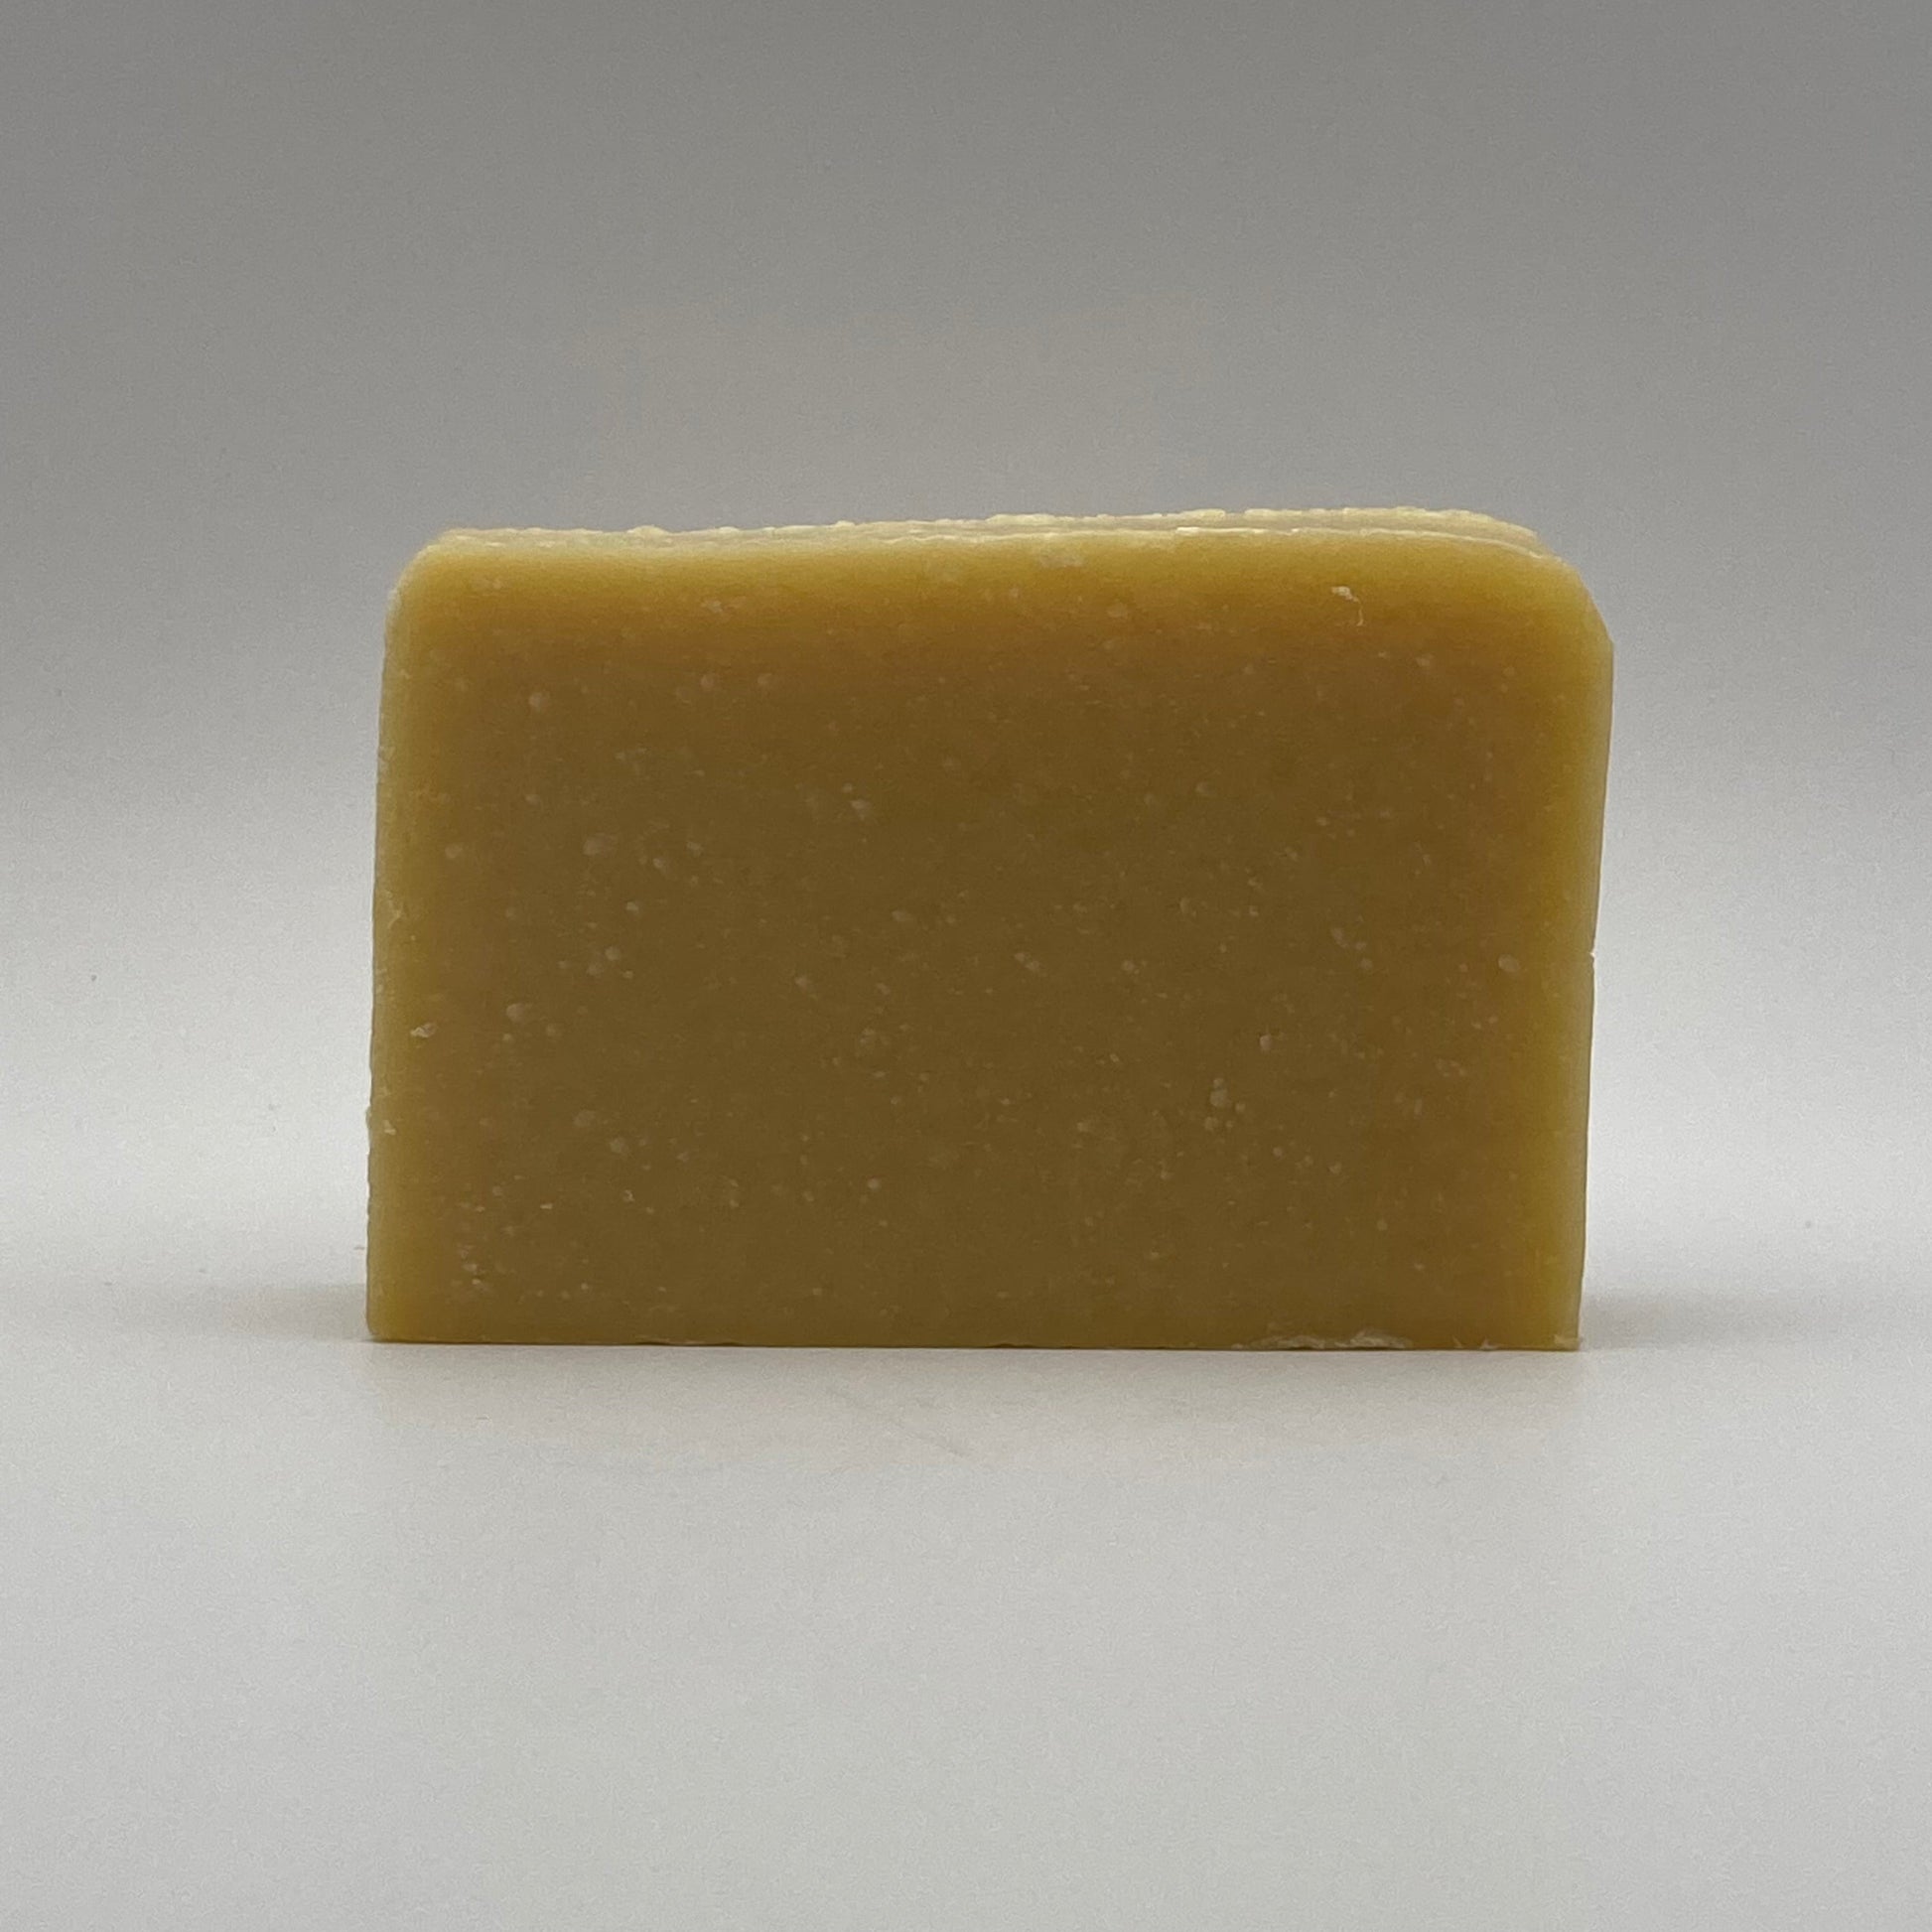 The Unscented Goat Milk Soap Bar